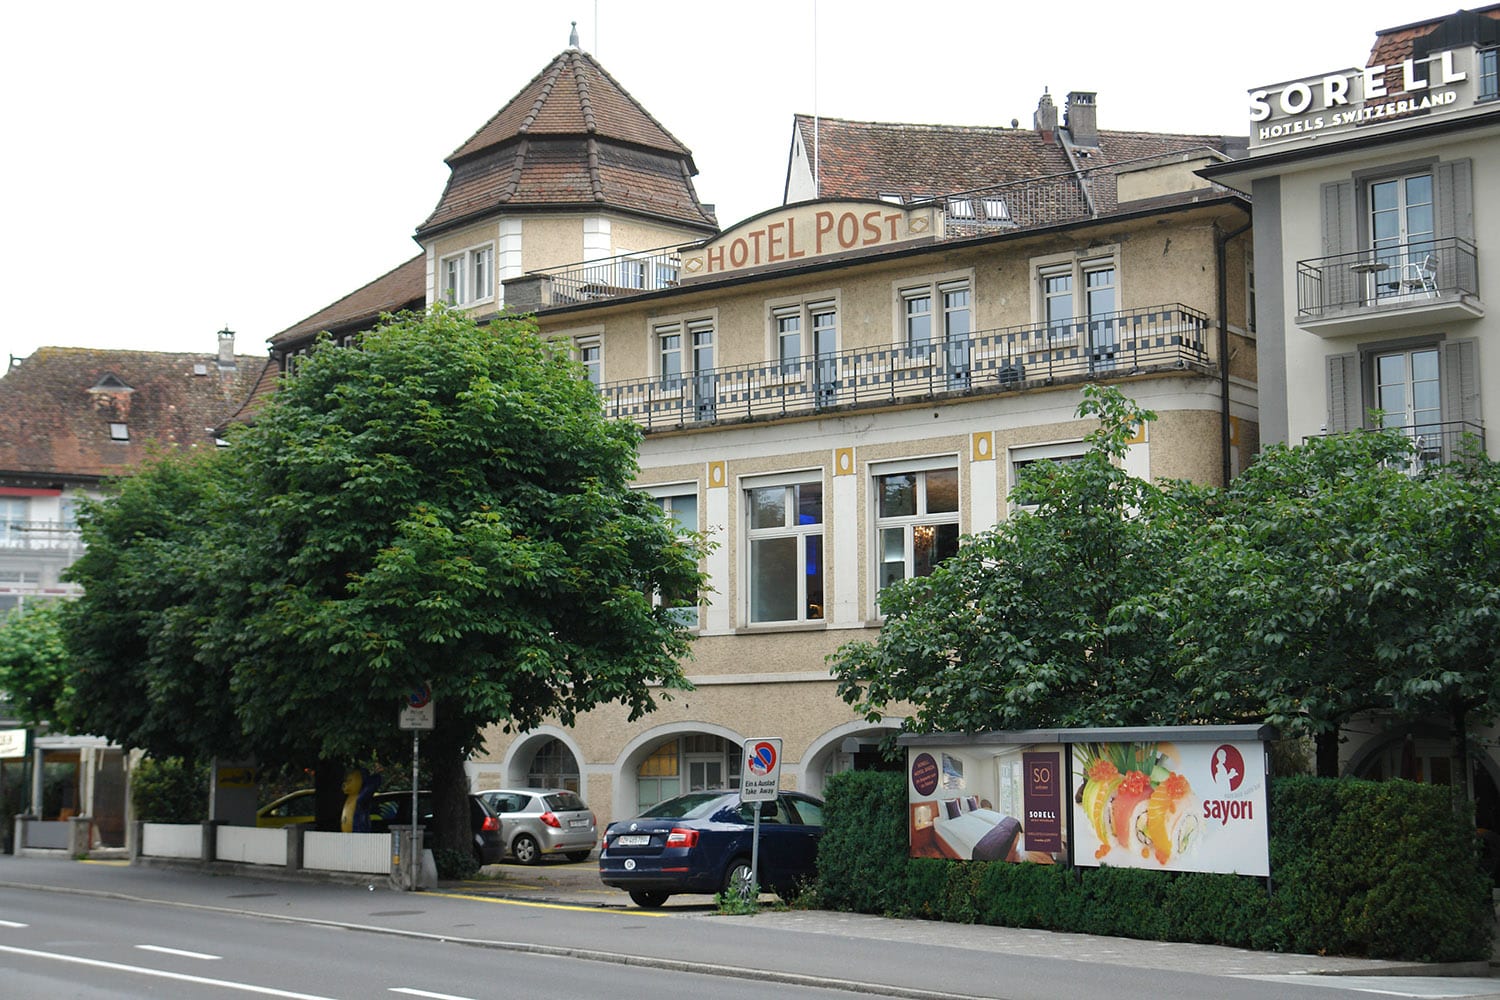 Radio Zürisee studios are in this historical 160-year old hotel